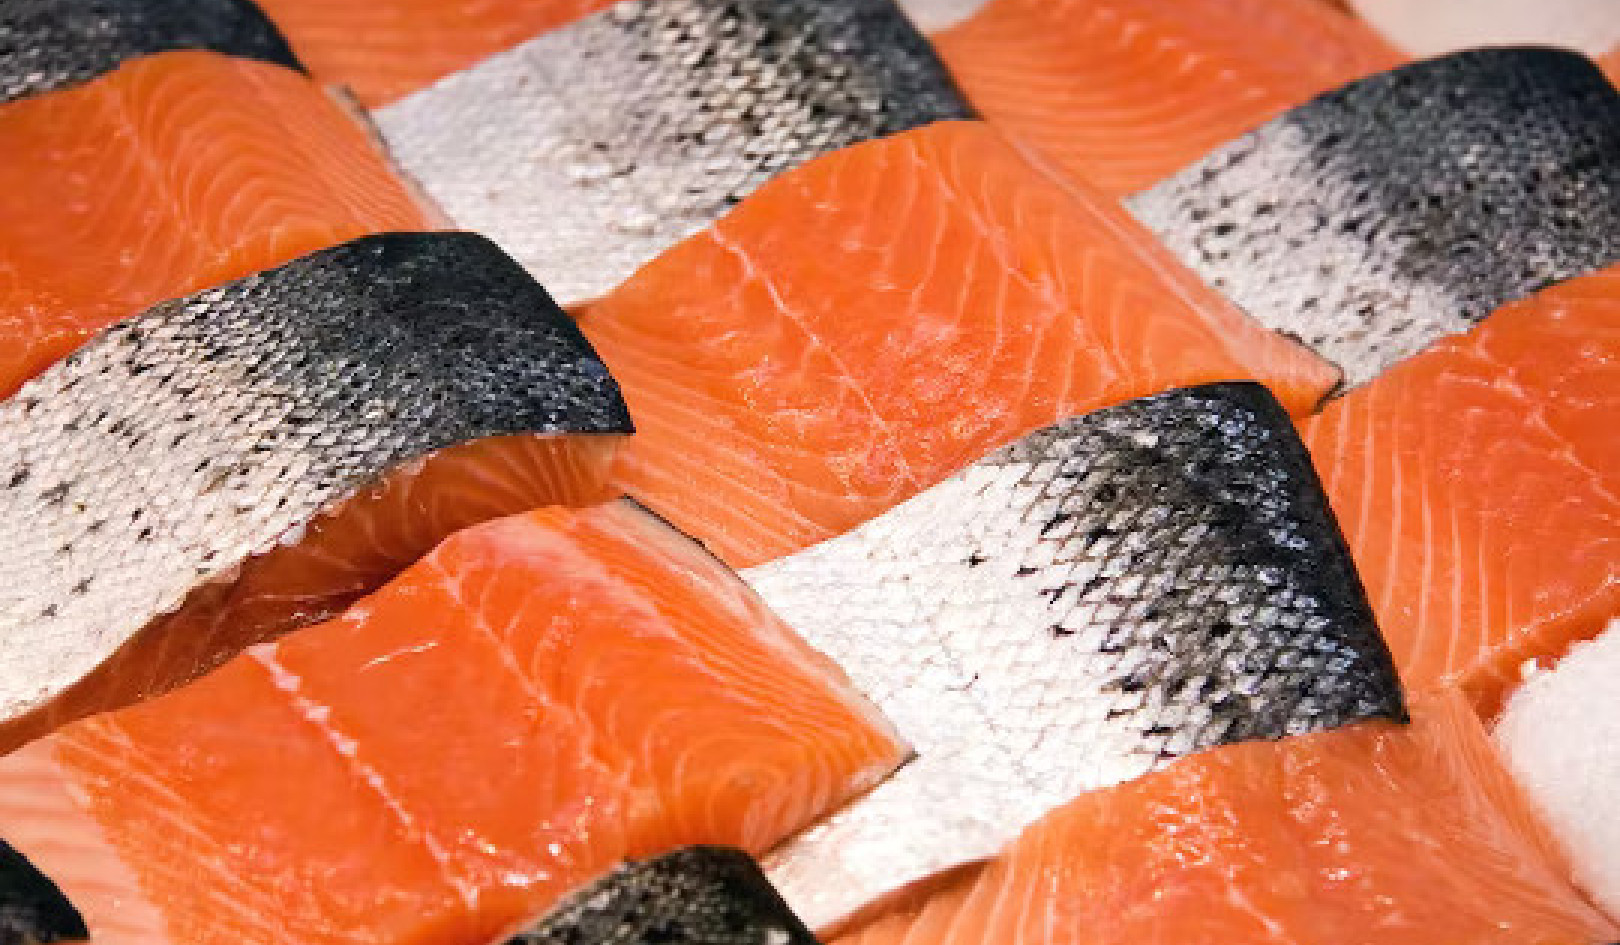 Color of Farmed Salmon Comes from an Antioxidant in Their Feed